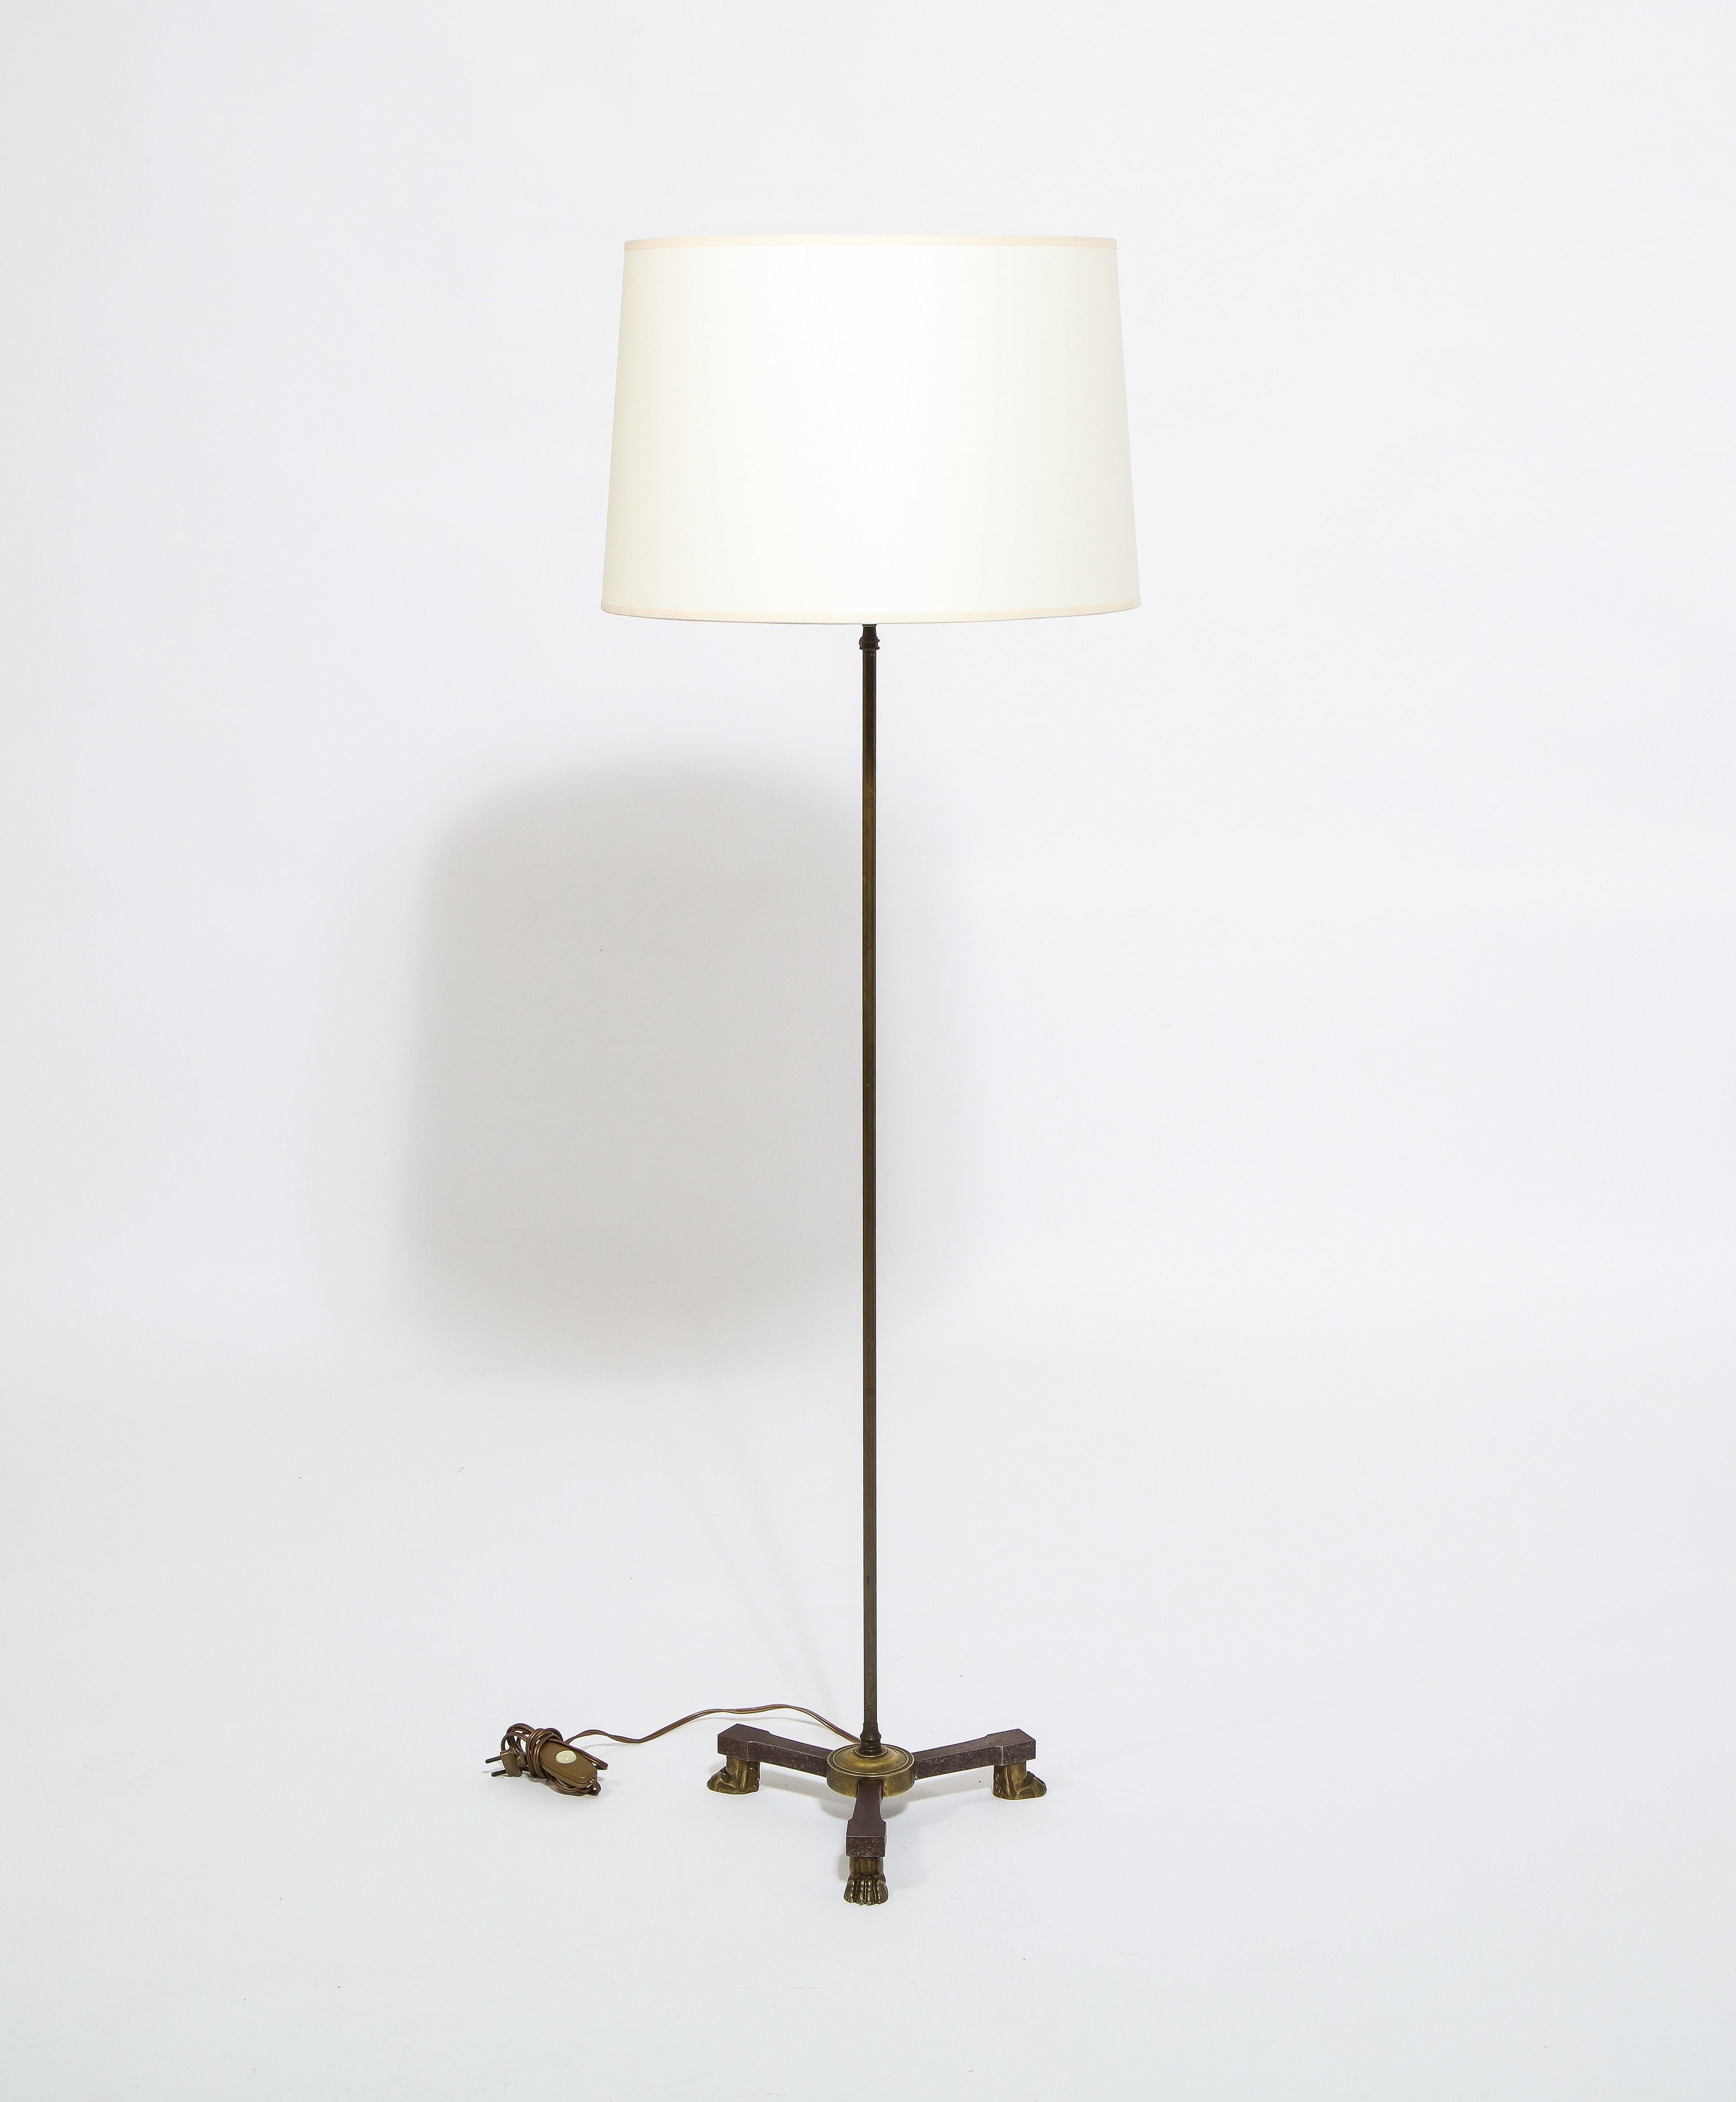 Rare patinated bronze lamp floor.
Attributed to André Arbus.
Height adjustable from 45